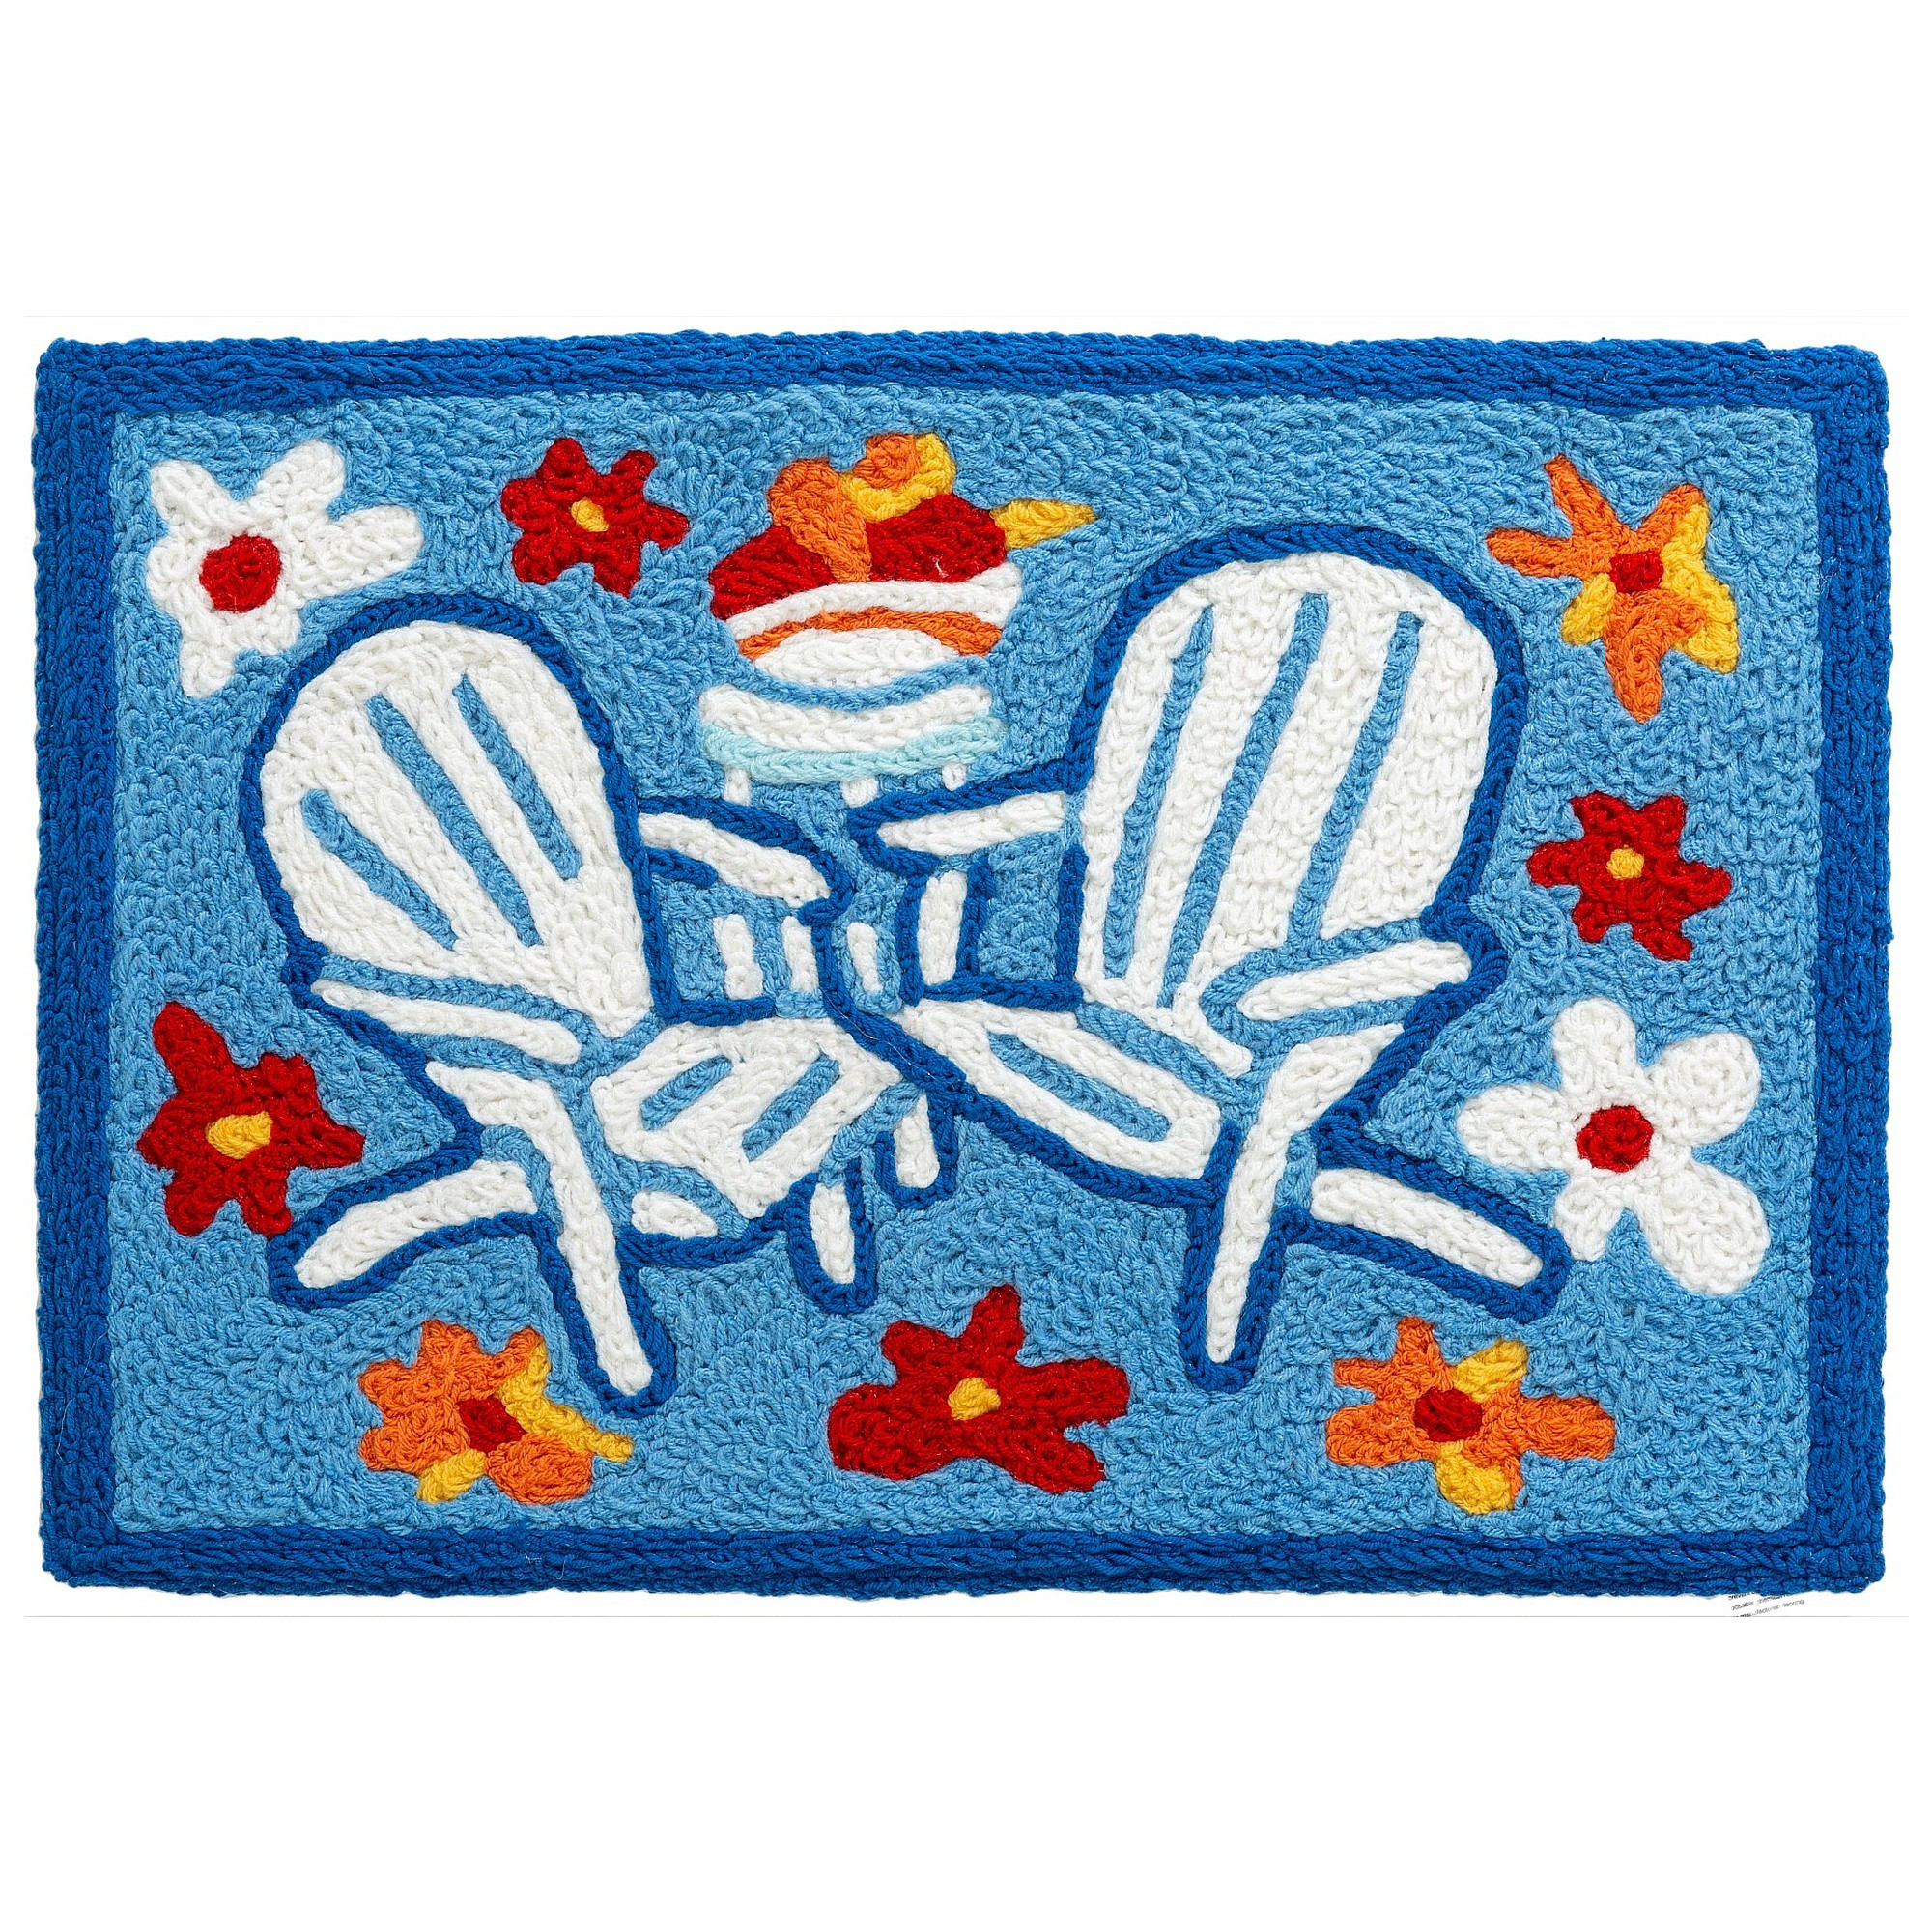 Adirondack Chairs & Flowers Jellybean Accent Floral Rug 20" x 30"